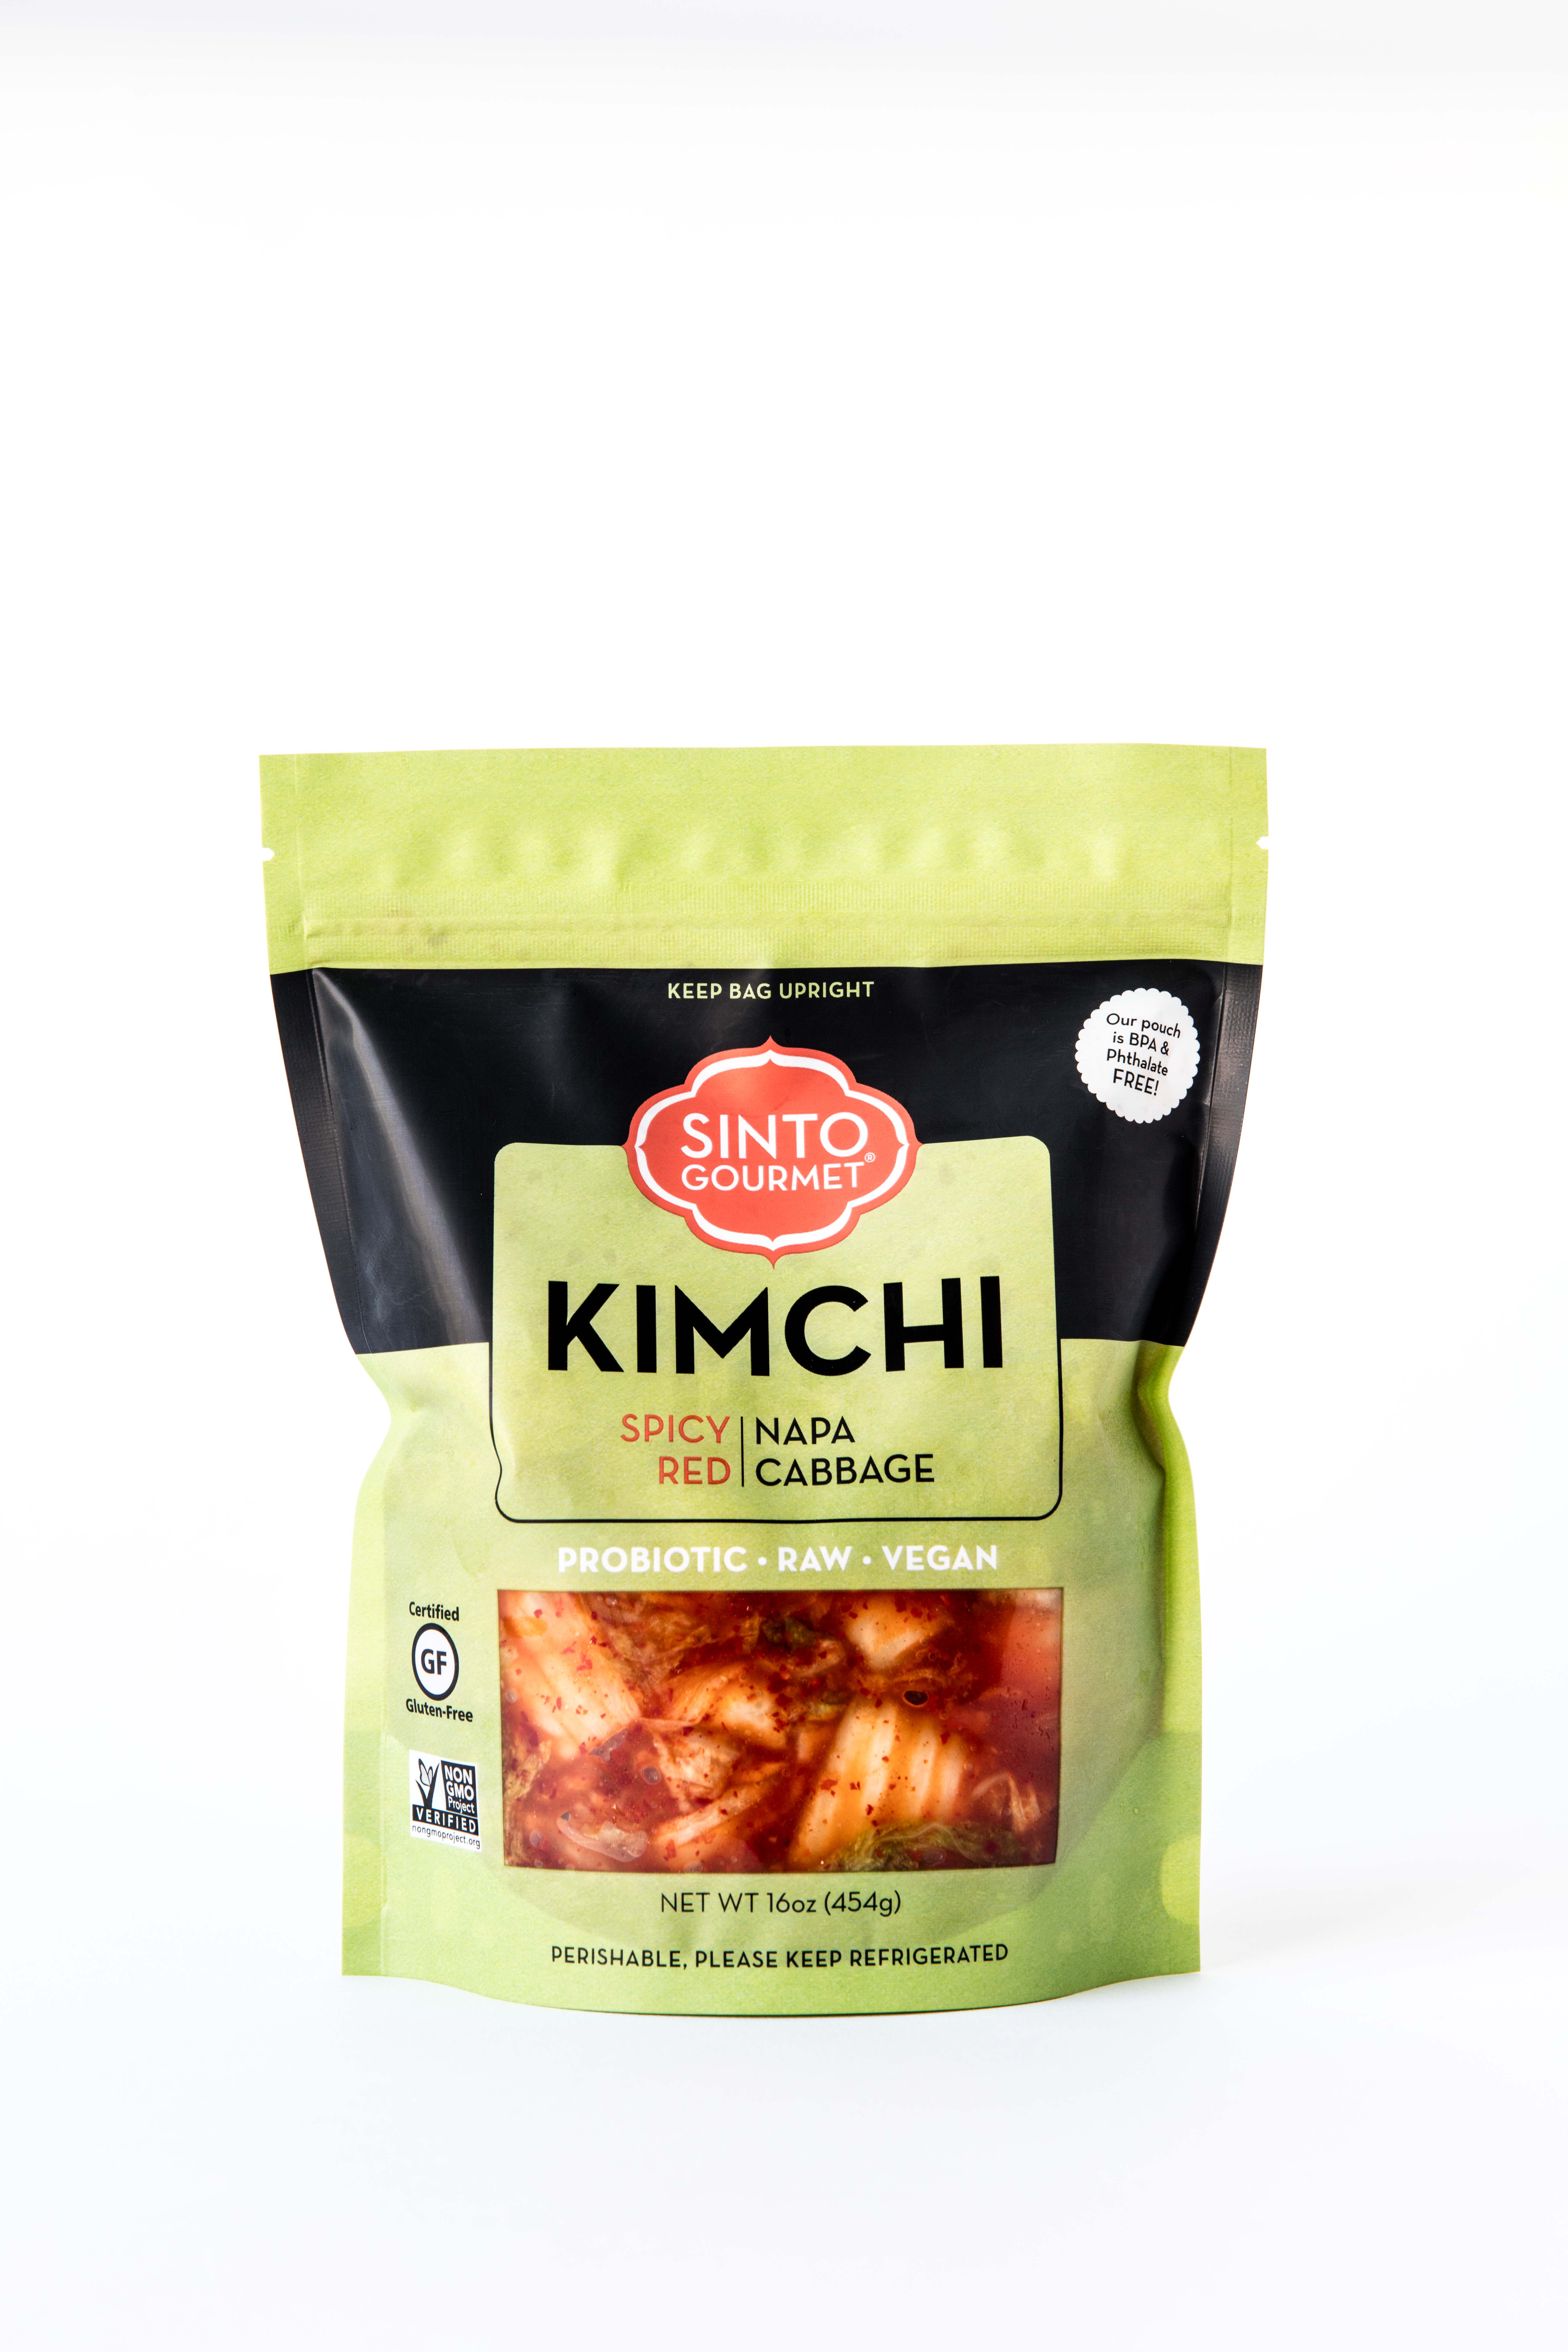 Raw and Vegan Authentic Kimchi by Sinto Gourmet